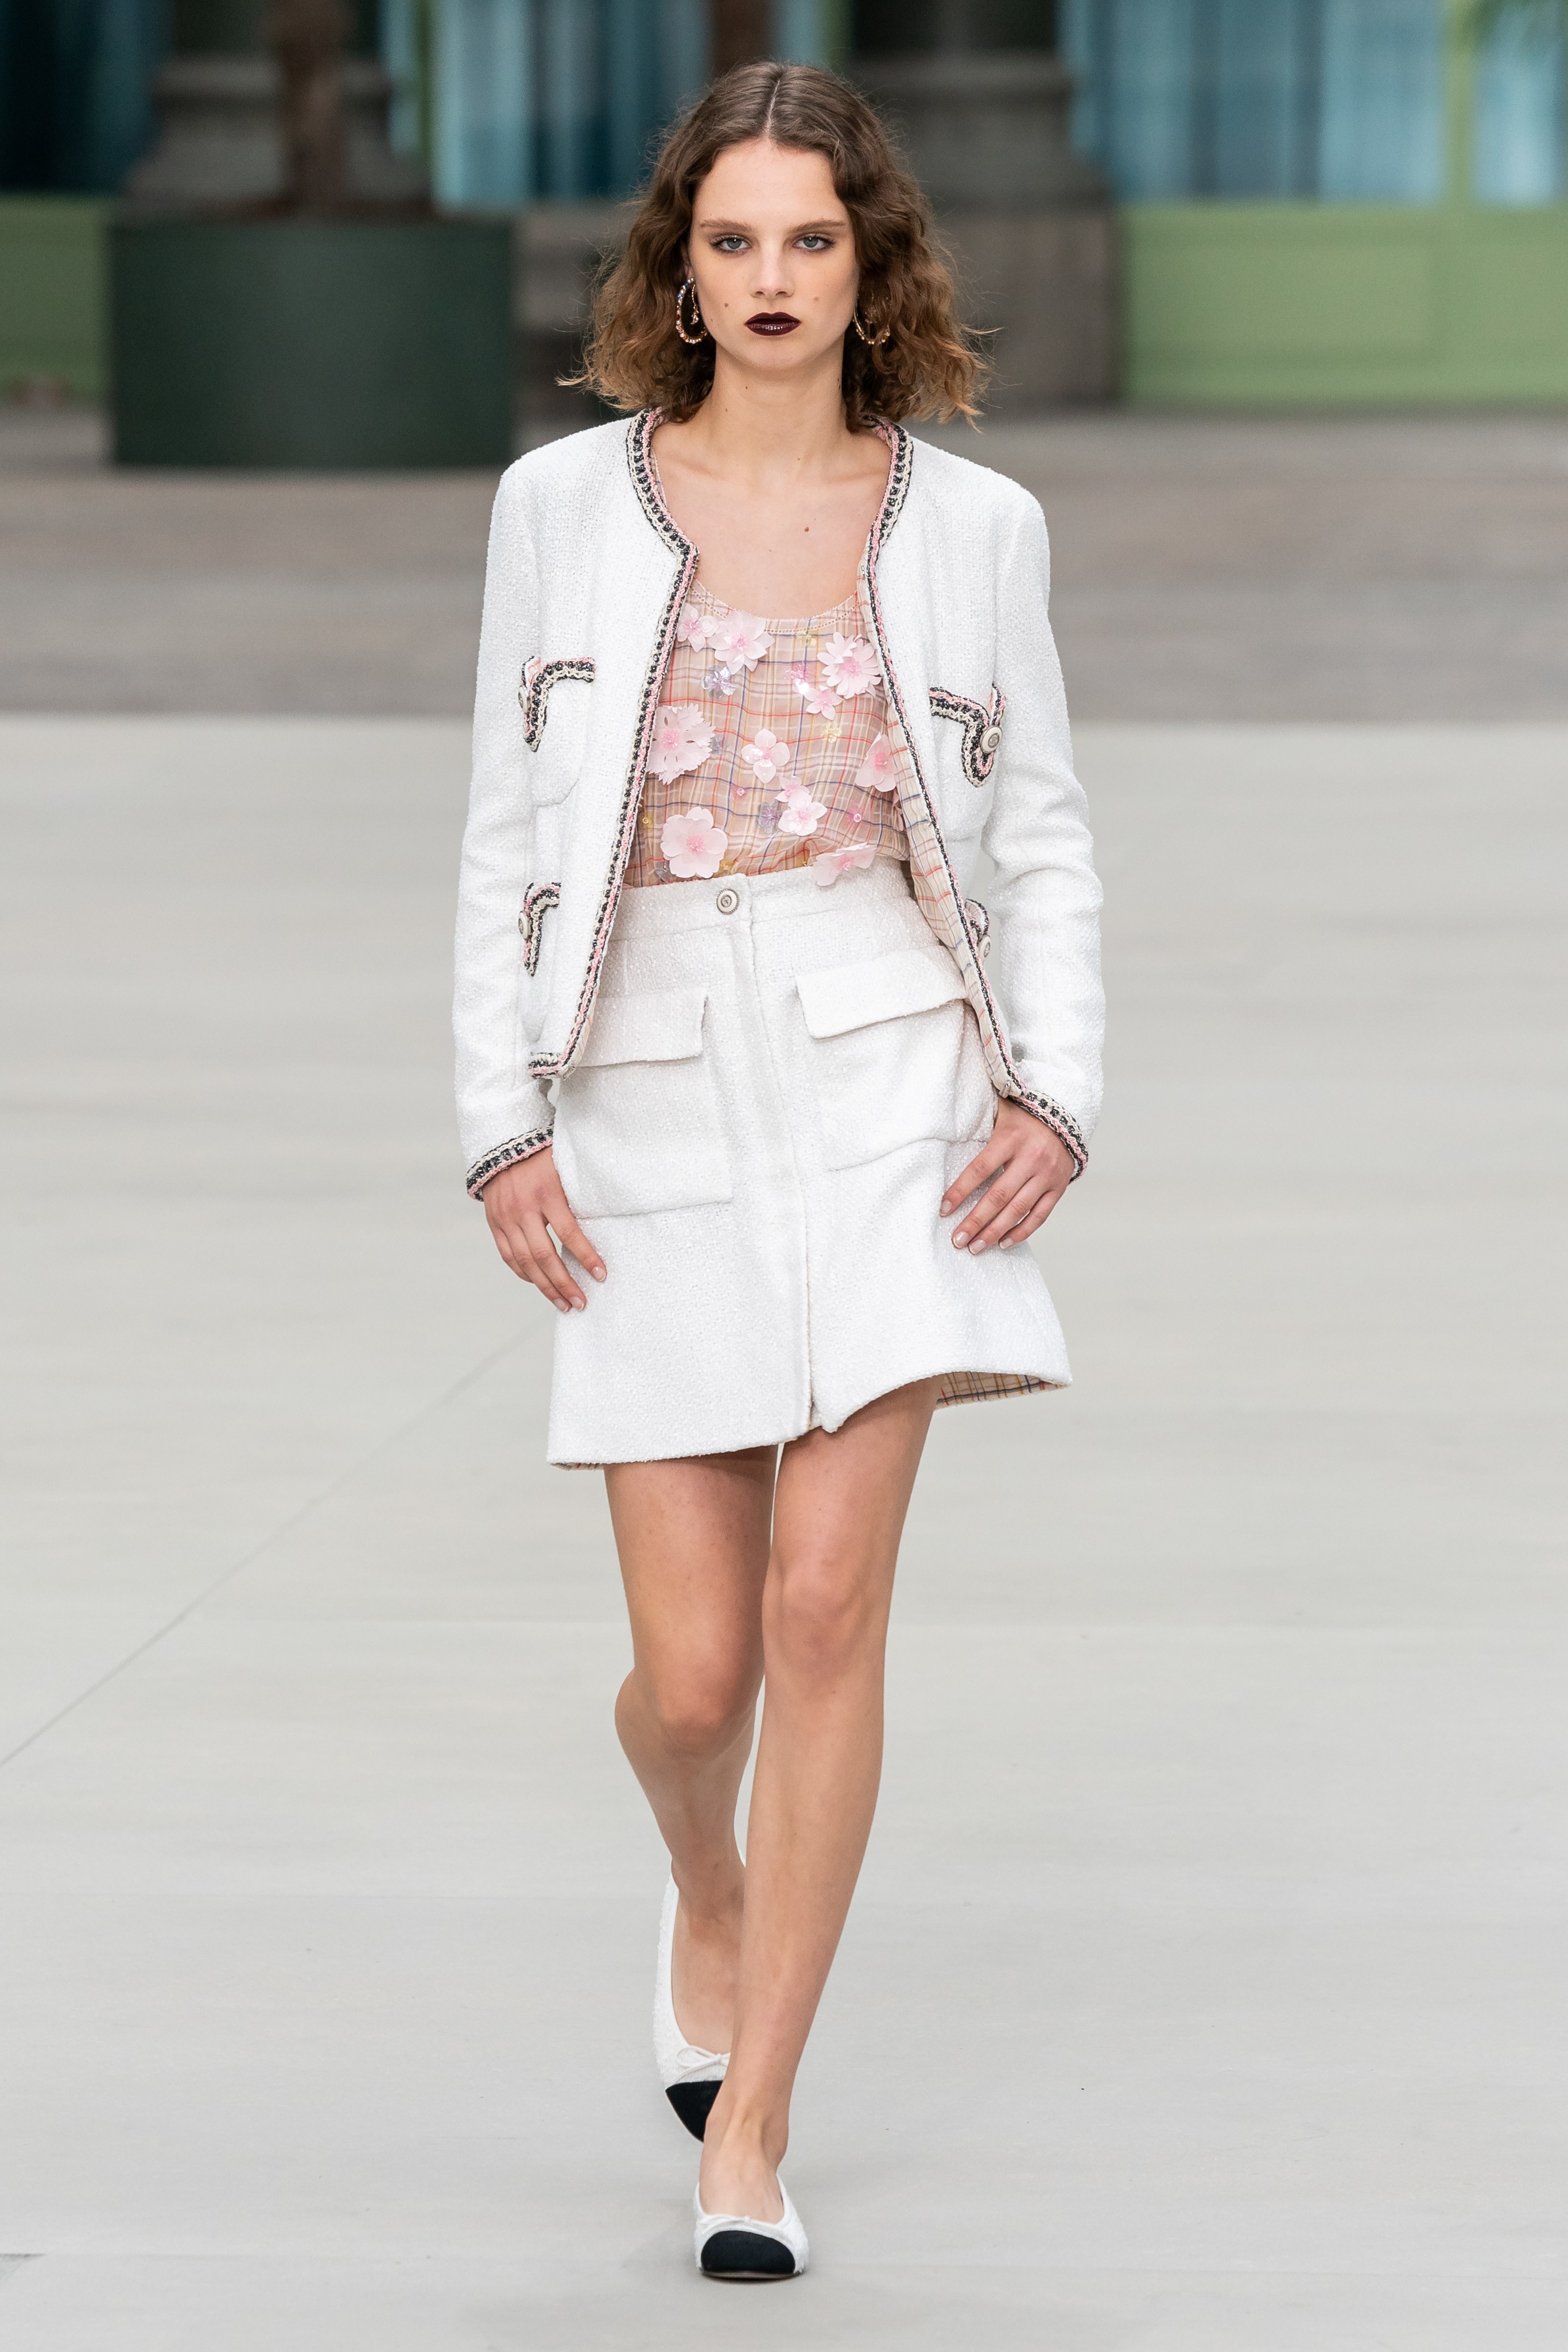 CHANEL CRUISE 2020 – THE FASHION INSPECTOR